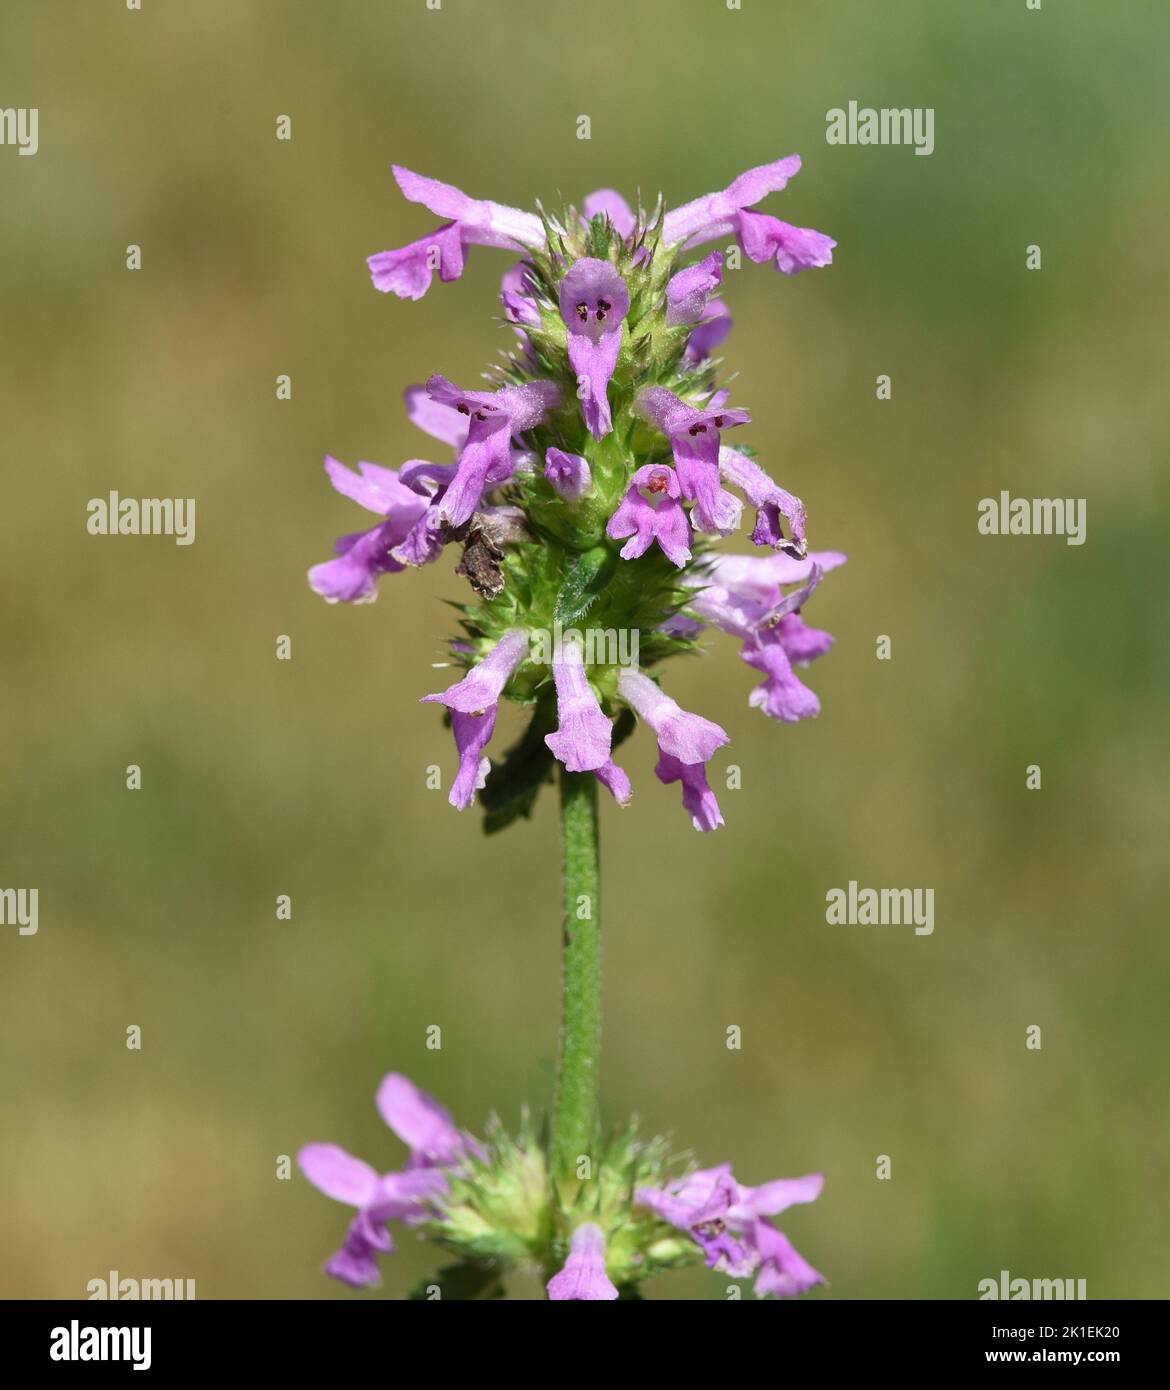 Ziest, Stachys officinalis is an important medicinal plant with purple flowers. Stock Photo